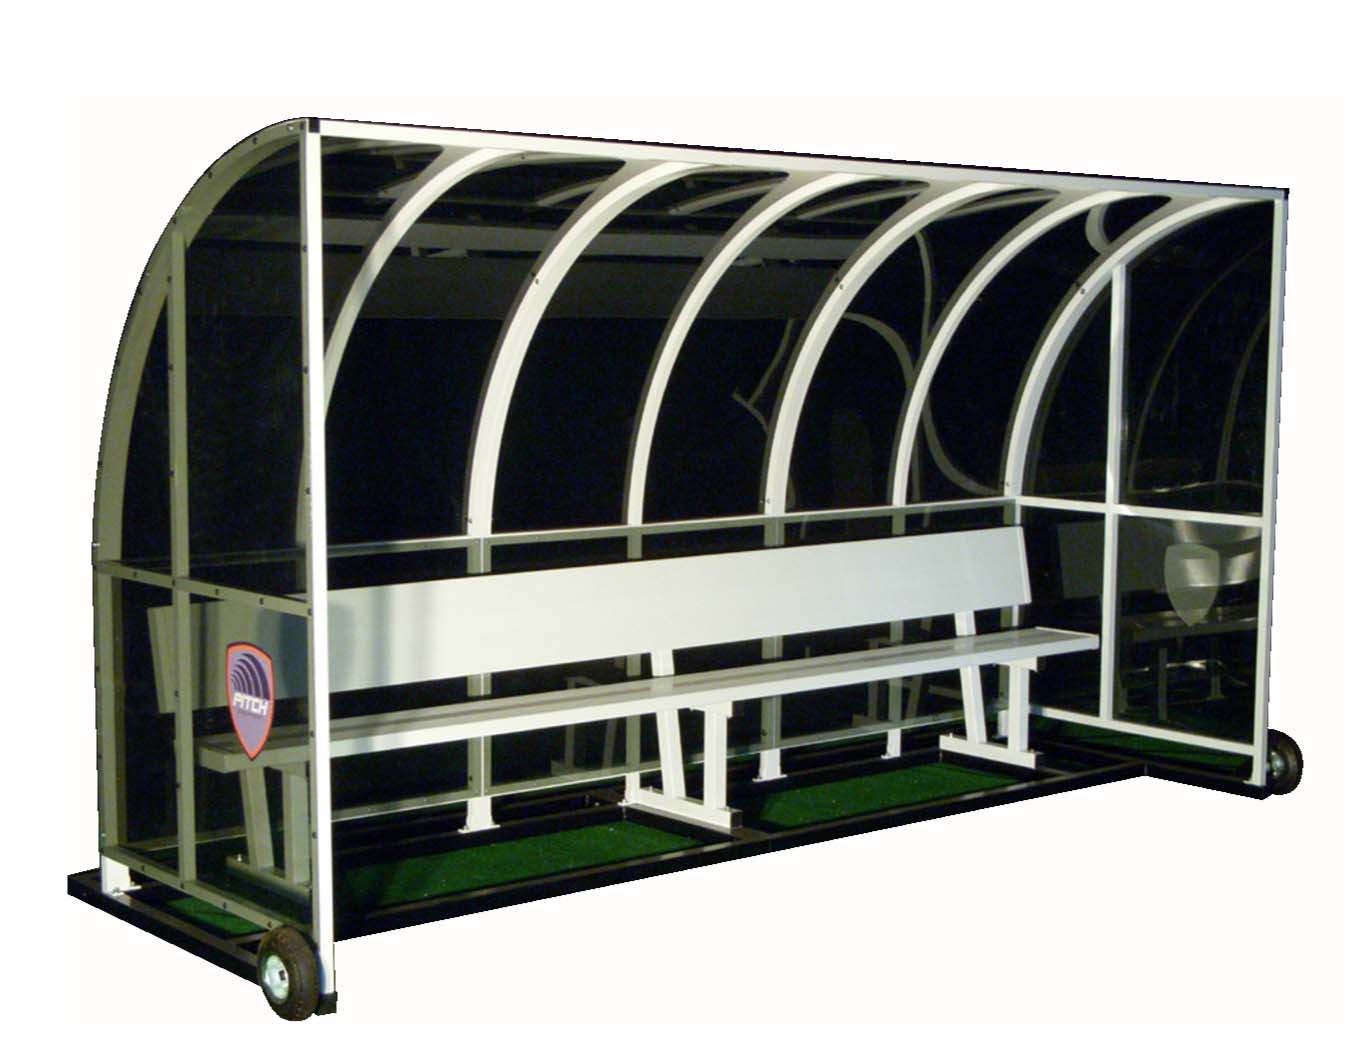 European Soccer Team Shelter With Bench 8' Wide with Bench